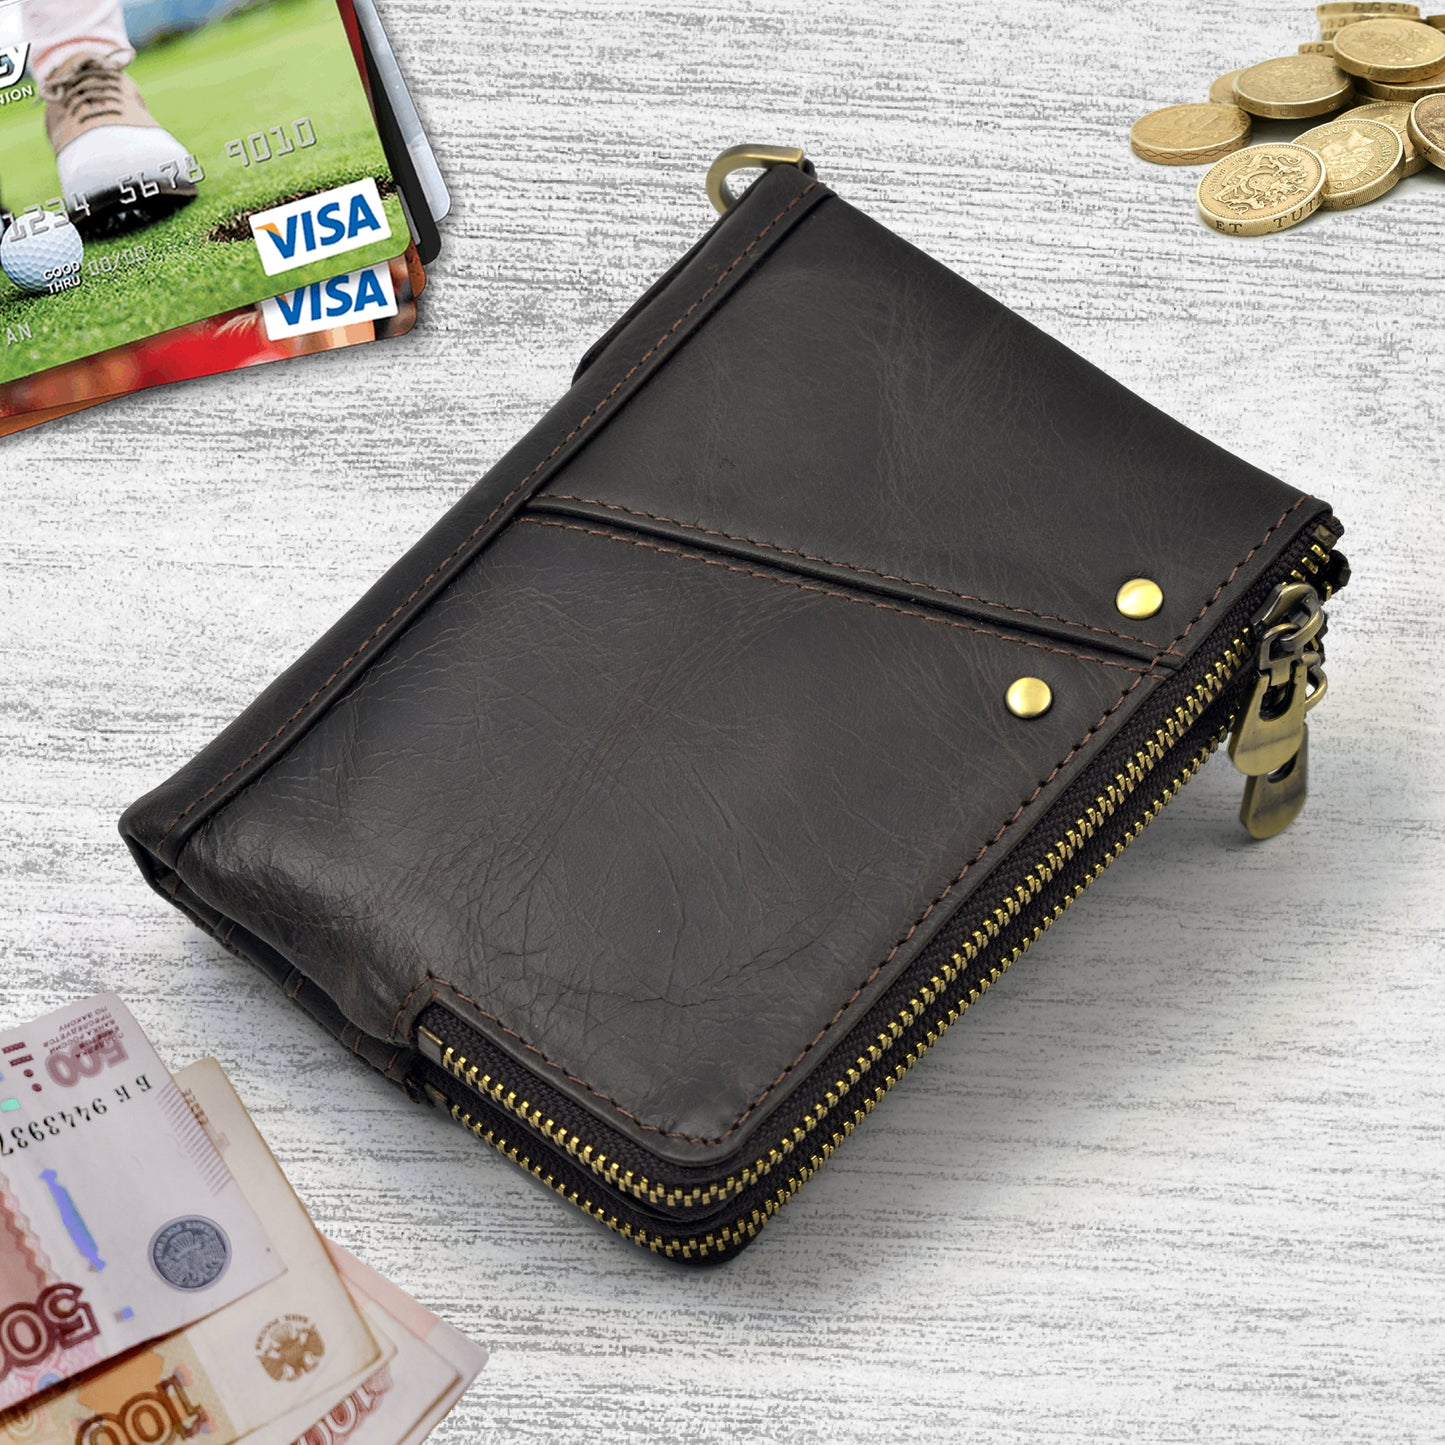 Original KAVI's Leather Wallet | Original Leather Imported From China | KAVIS 09